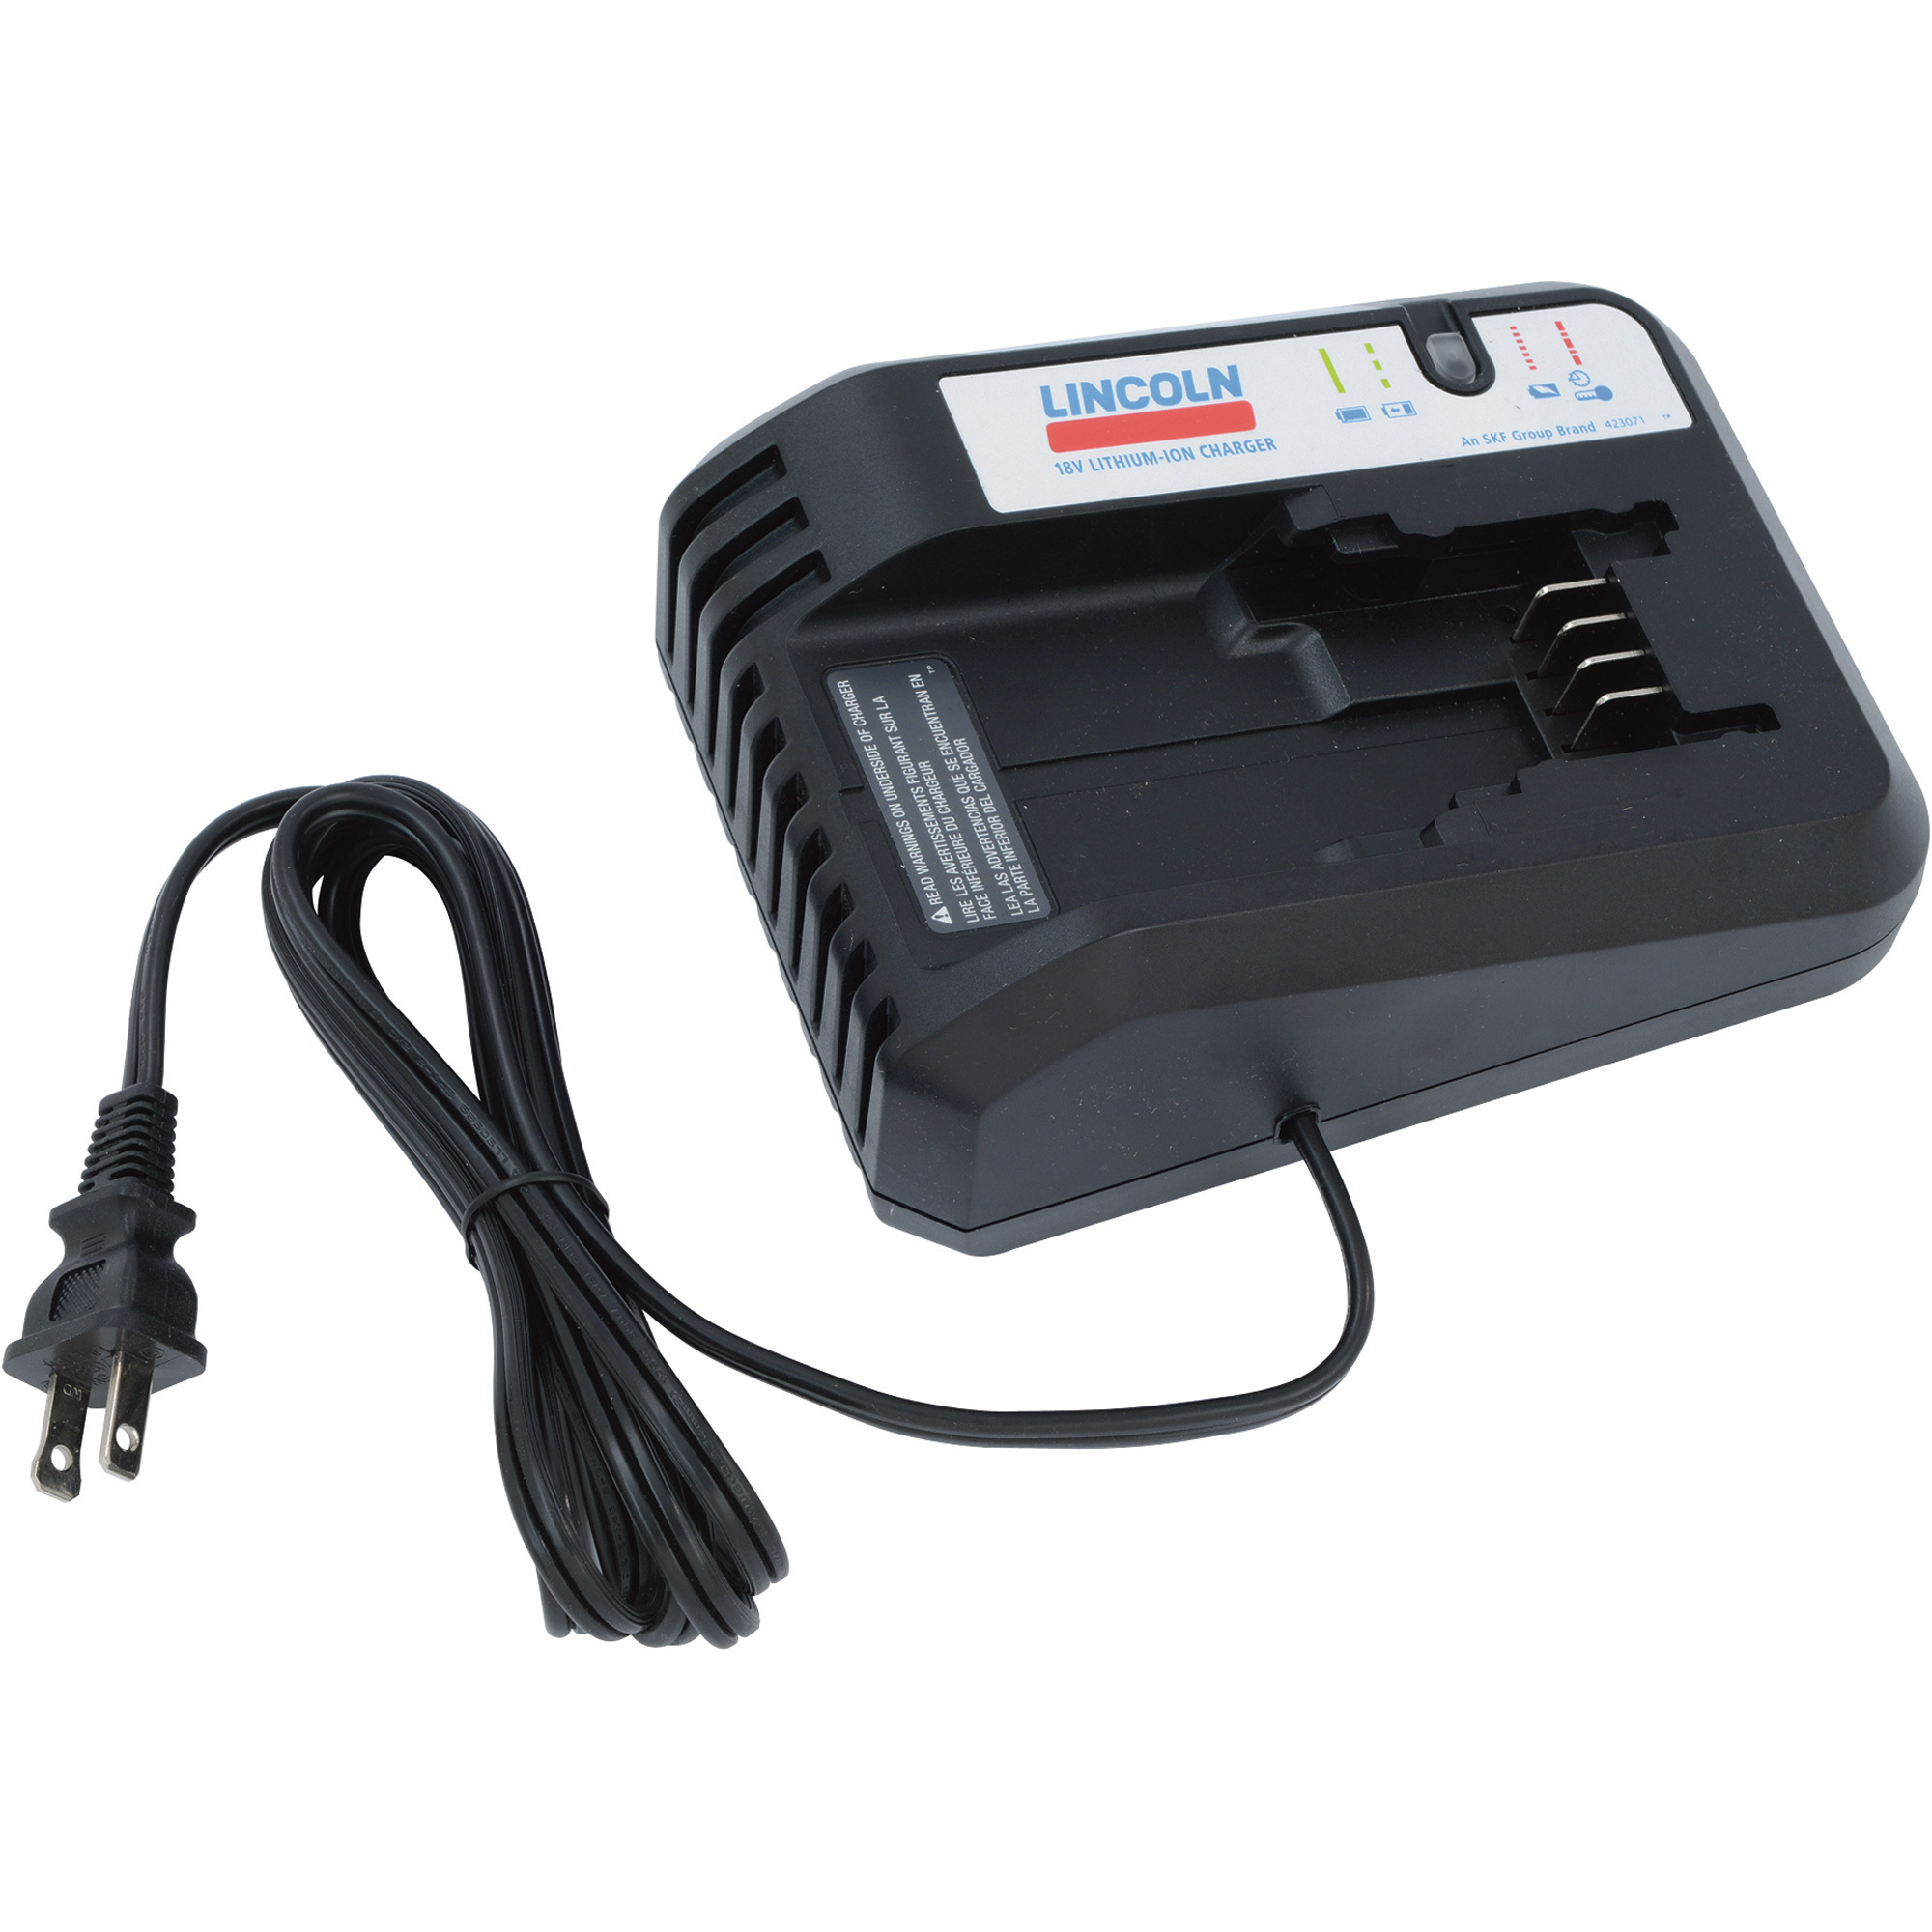 Lincoln Lithium-Ion Battery Charger, 20 Volt, Model 1870